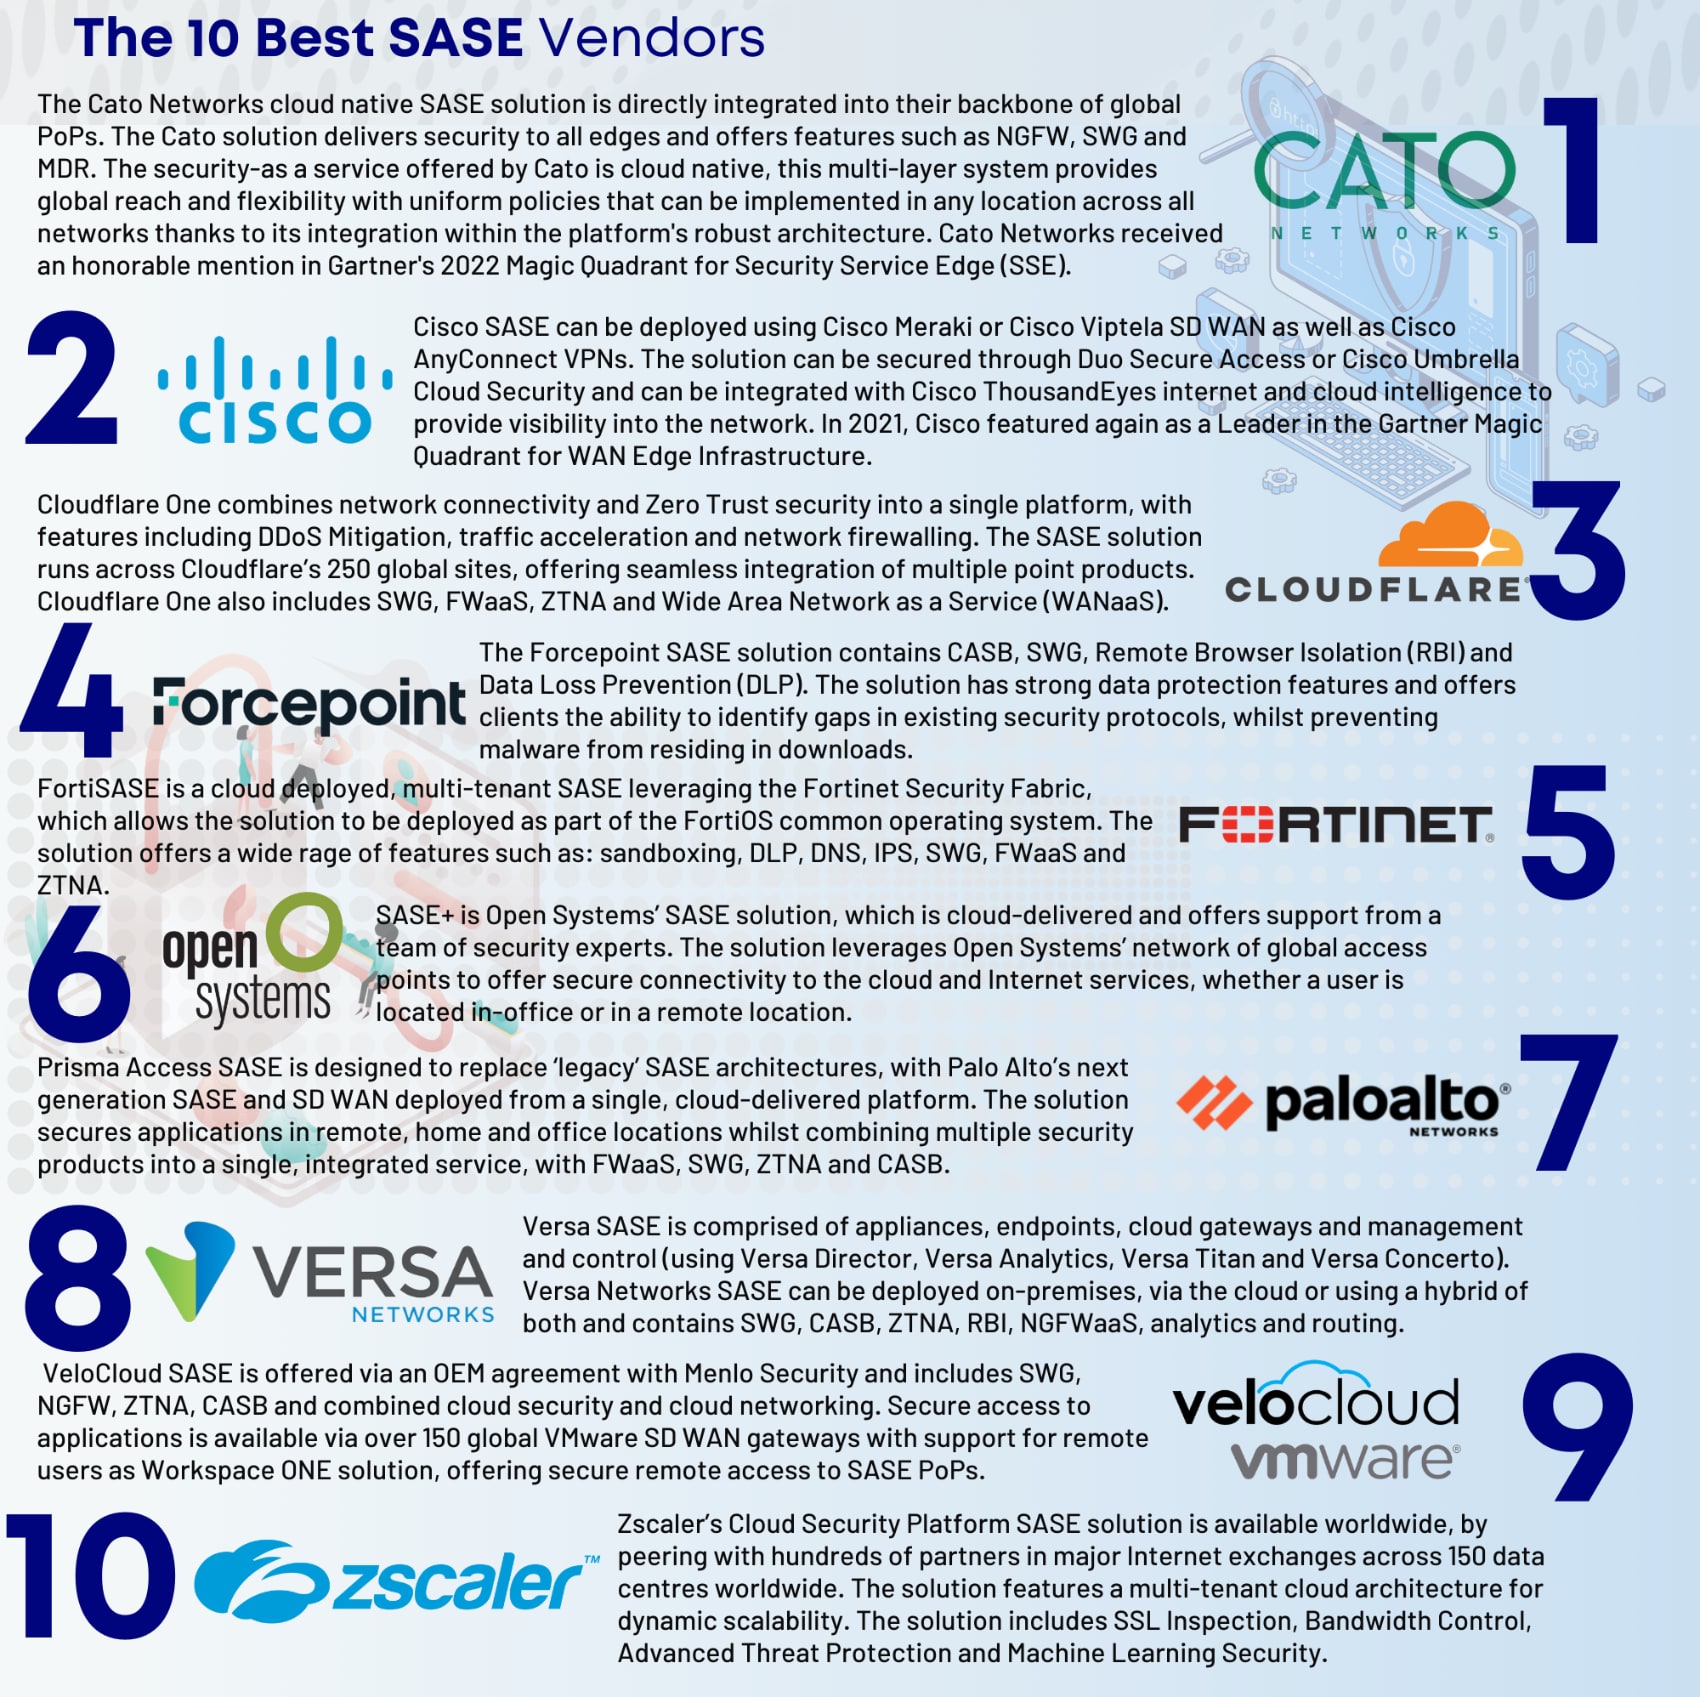 Who are the best rated SASE Vendors?